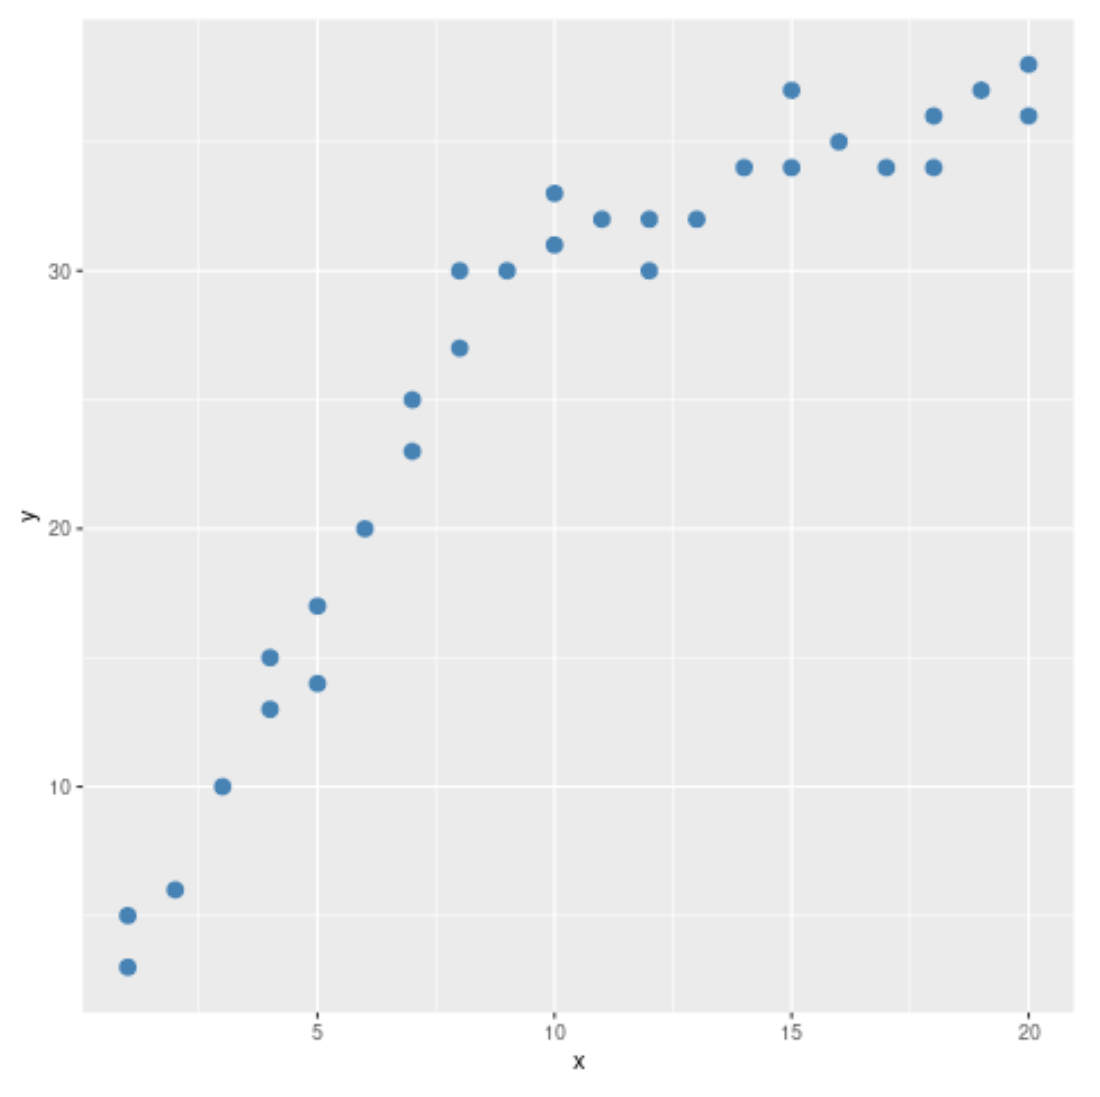 Chow test in R